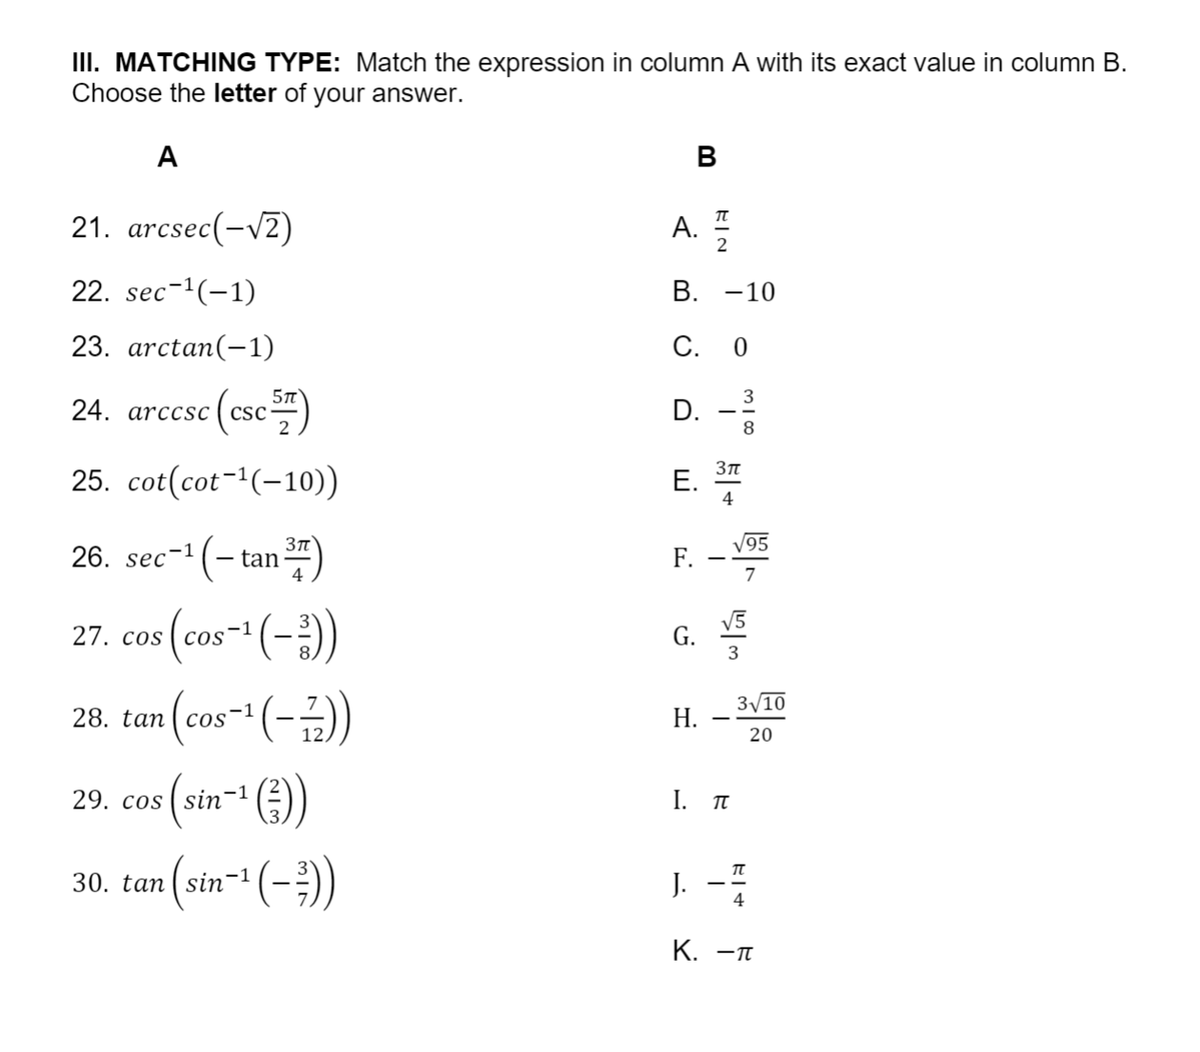 III. MATCHING TYPE: Match the expression in column A with its exact value in column B.
Choose the letter of your answer.
A
B
21. arcsec(-V2)
A.
2
22. sec-1(-1)
В. —10
23. arctan(-1)
С. 0
24. arccsc (csc")
D. -
3
8
25. cot(cot-(-10))
E.
Е.
4
26. sec-1 (- tan)
V95
F.
7
27. cos (cos- (-)
(cos-*(-)
V5
G.
3
COS
3/10
Н.
20
29. cos ( sin
I. T
30. tan ( sin'
J. --
4
К. —п
